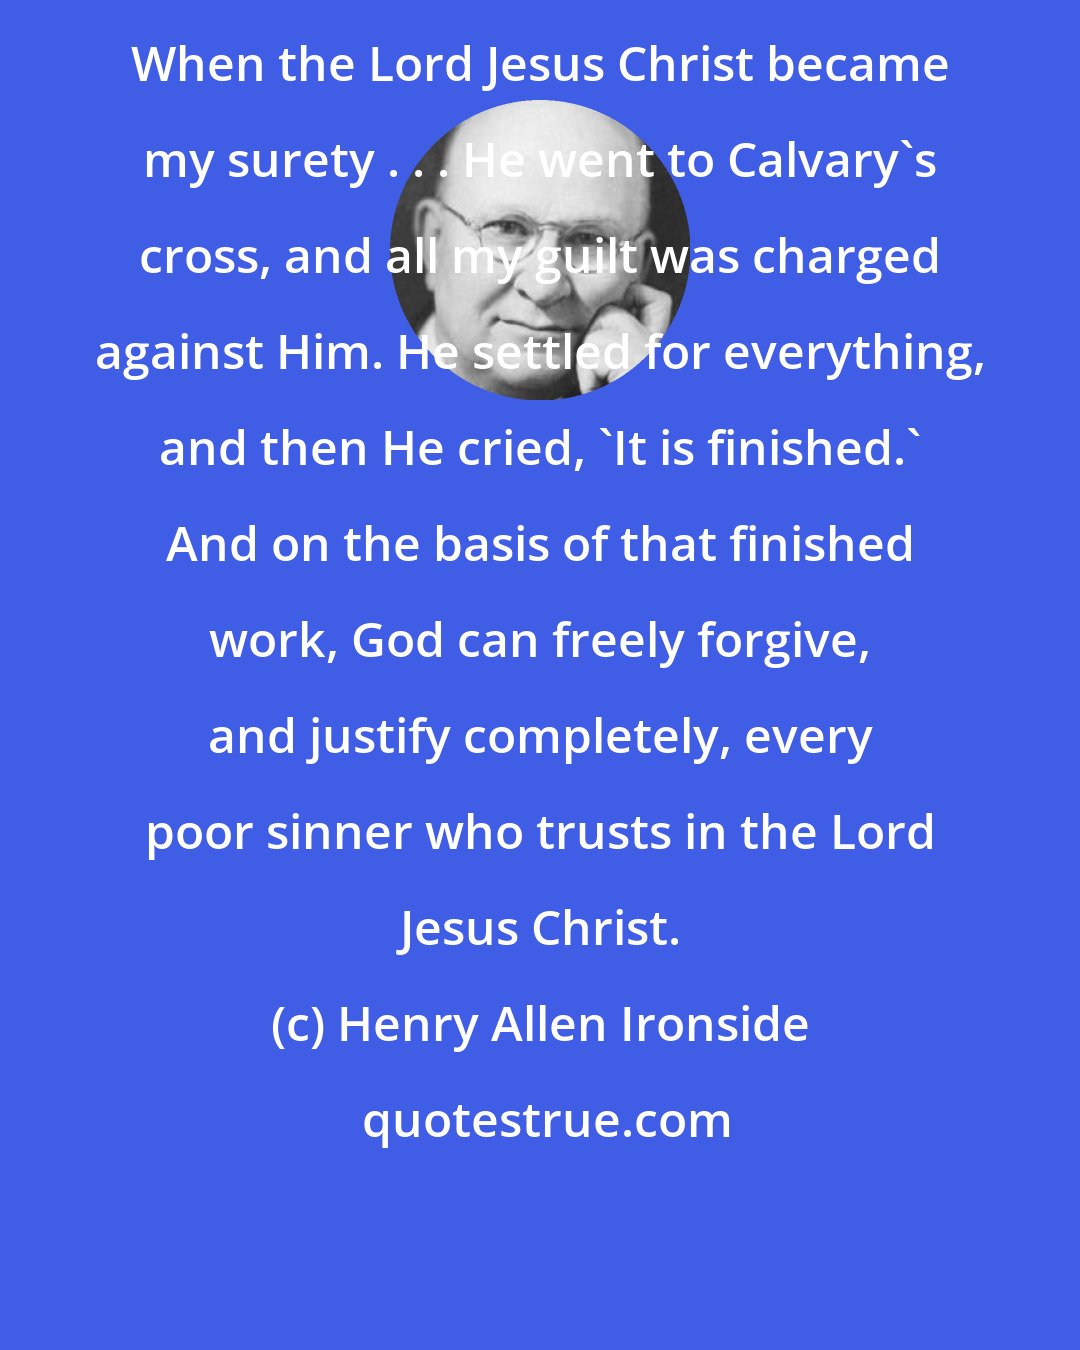 Henry Allen Ironside: When the Lord Jesus Christ became my surety . . . He went to Calvary's cross, and all my guilt was charged against Him. He settled for everything, and then He cried, 'It is finished.' And on the basis of that finished work, God can freely forgive, and justify completely, every poor sinner who trusts in the Lord Jesus Christ.